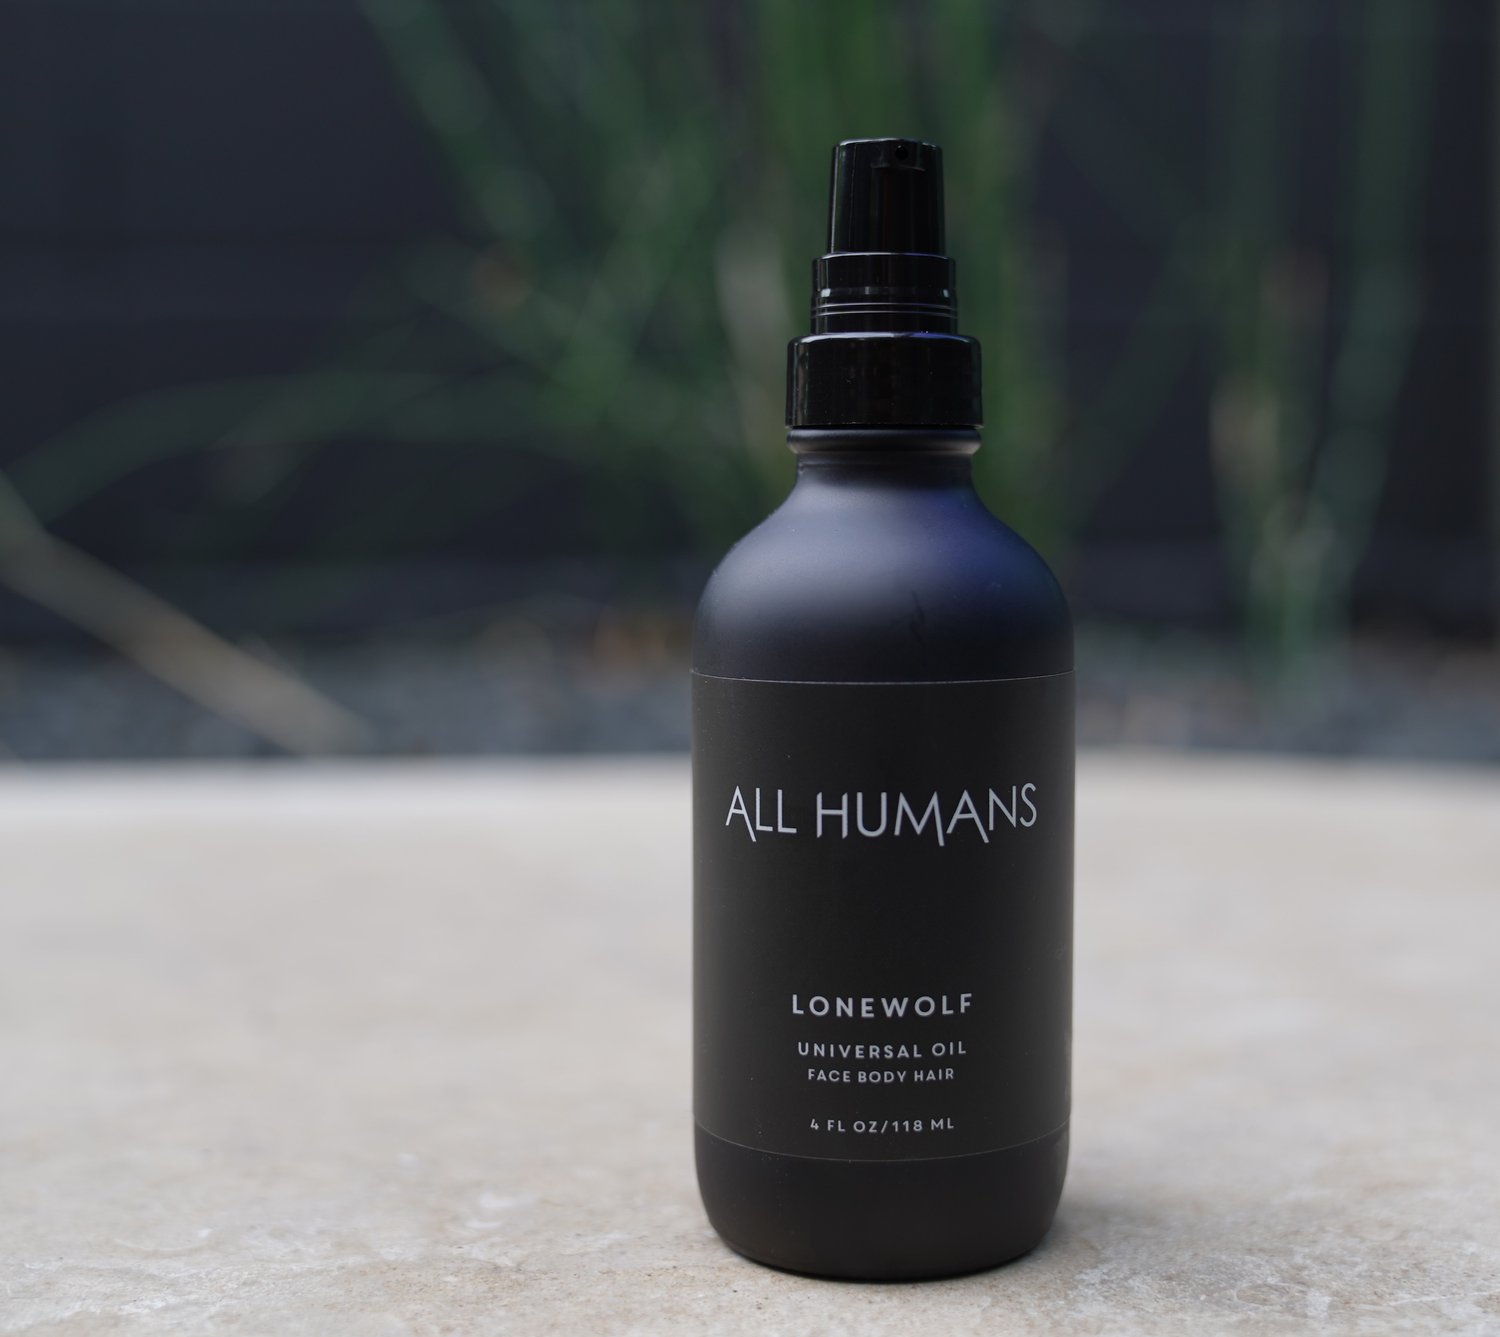 Universal Oil — All Humans Brand